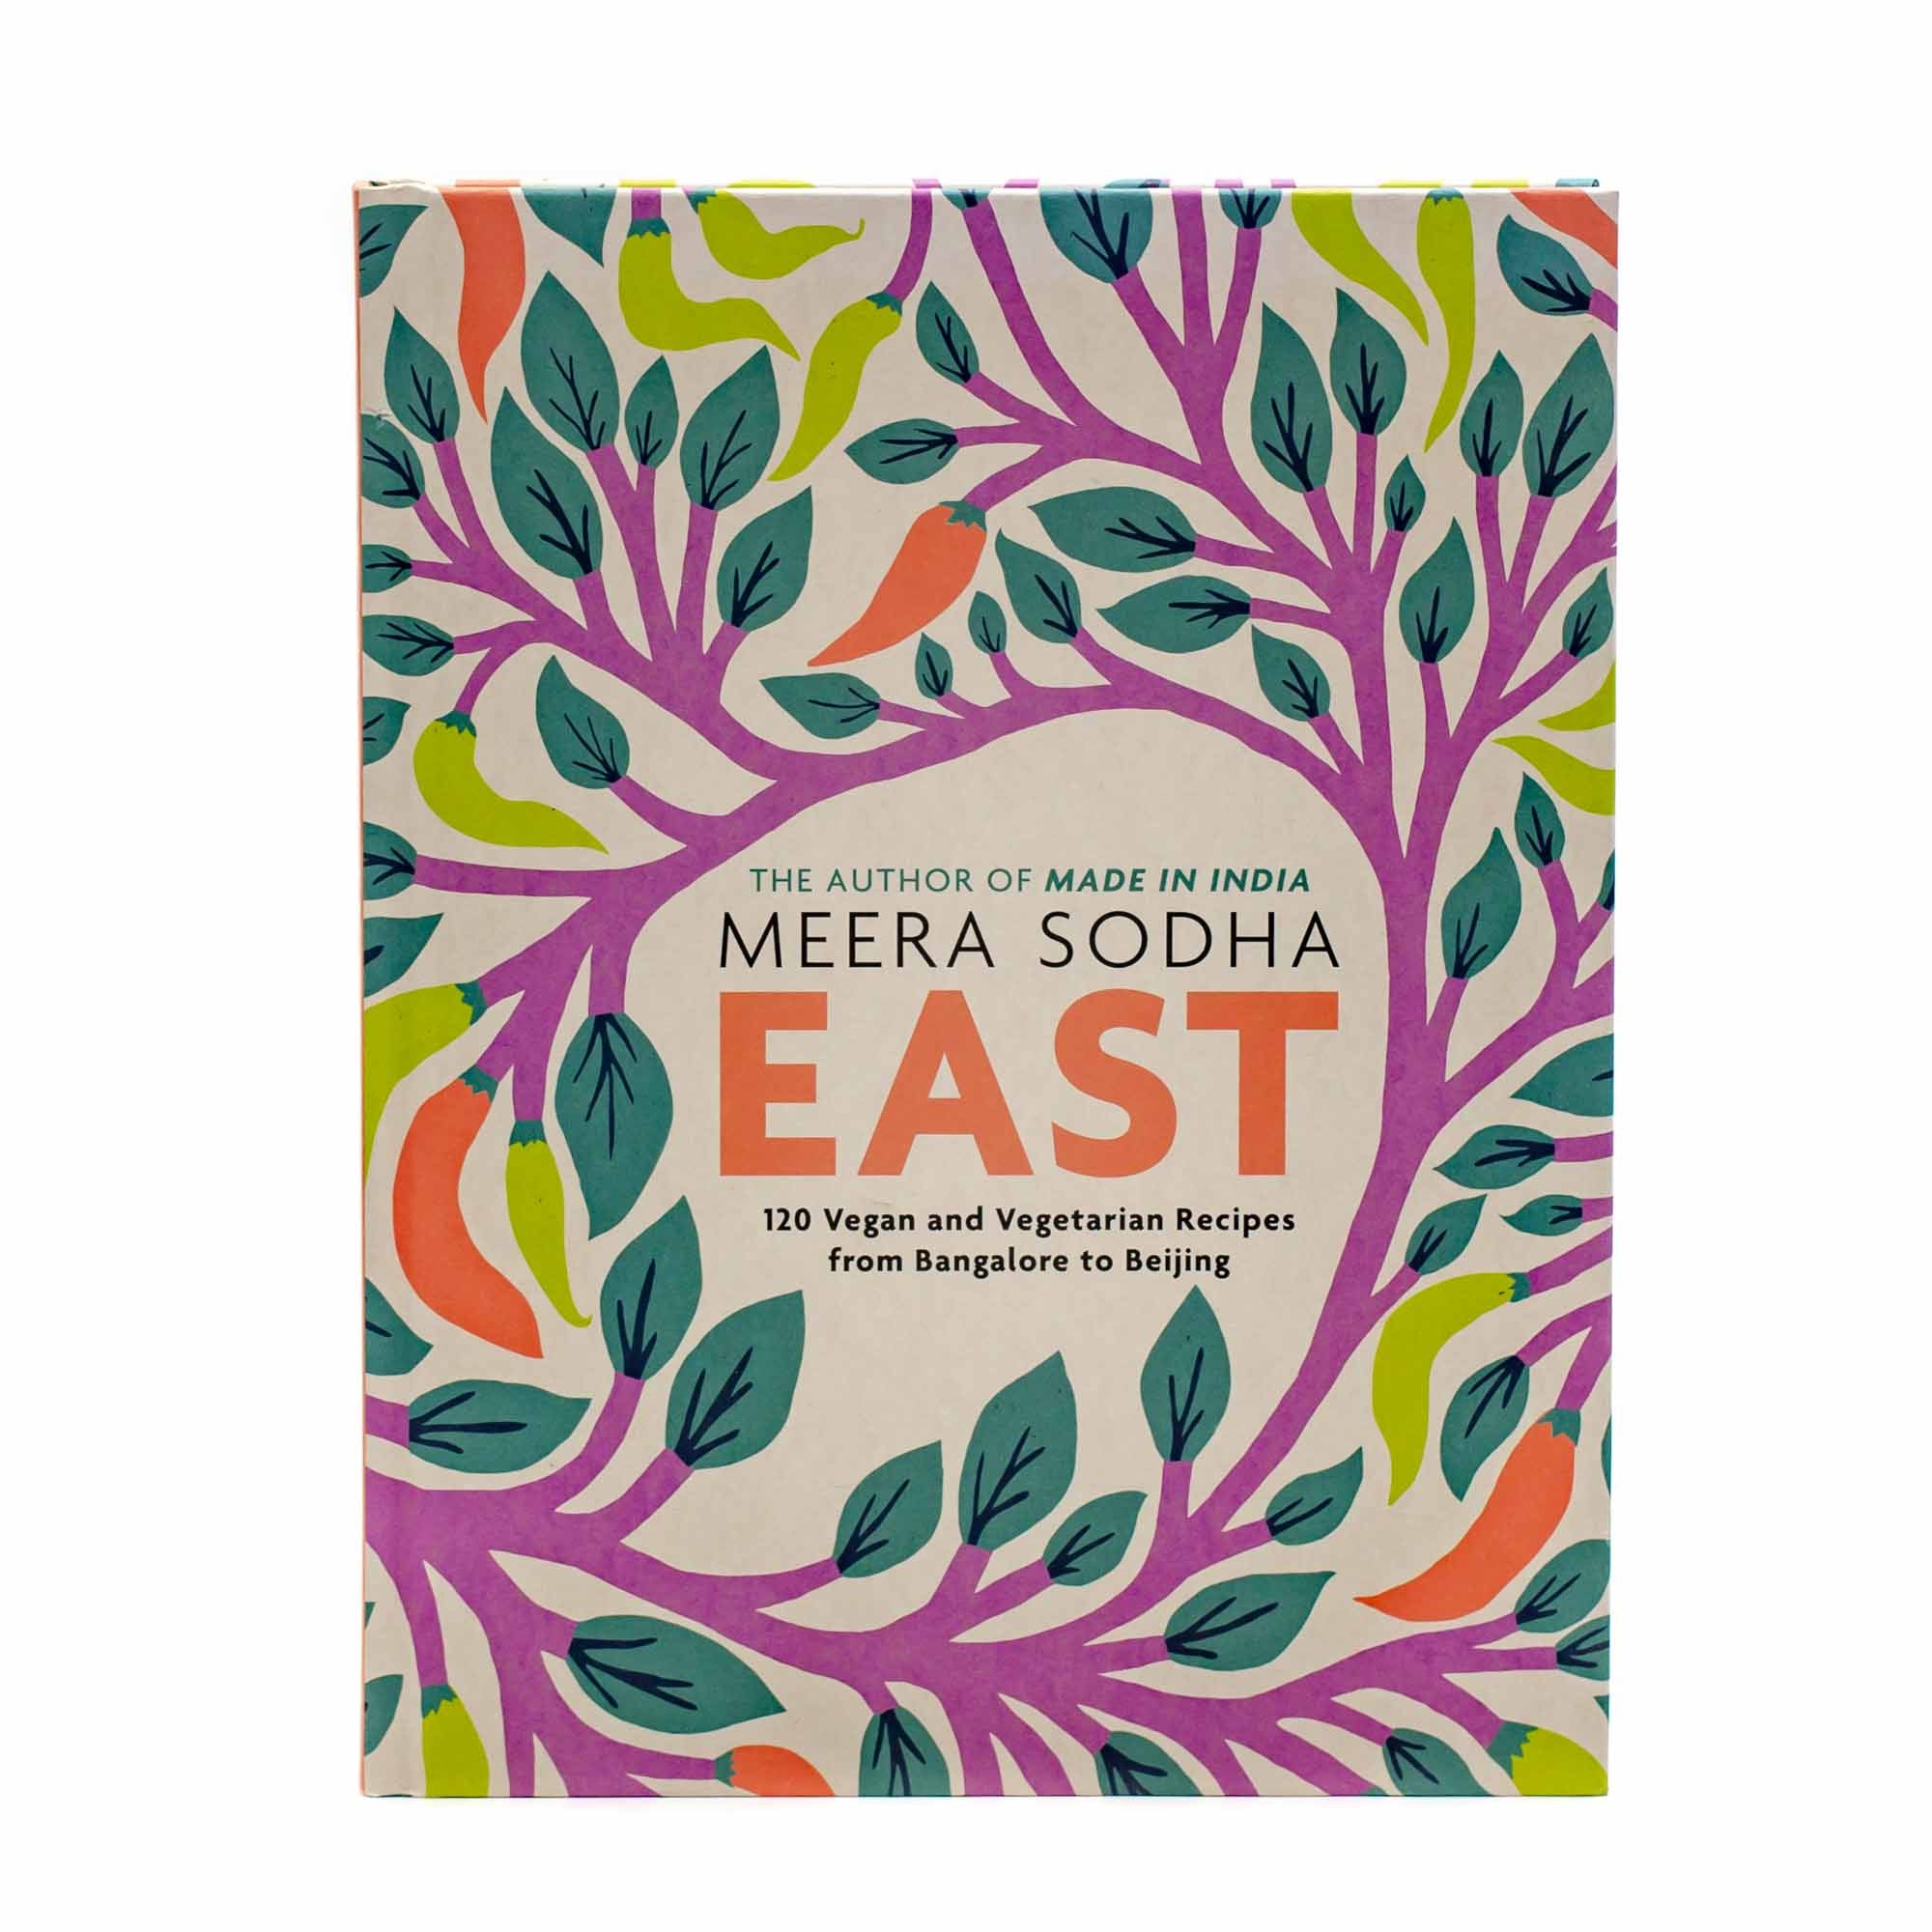 East: 120 Vegan and Vegetarian Recipes from Bangalore to Beijing by Meera Sodha - Mortise And Tenon